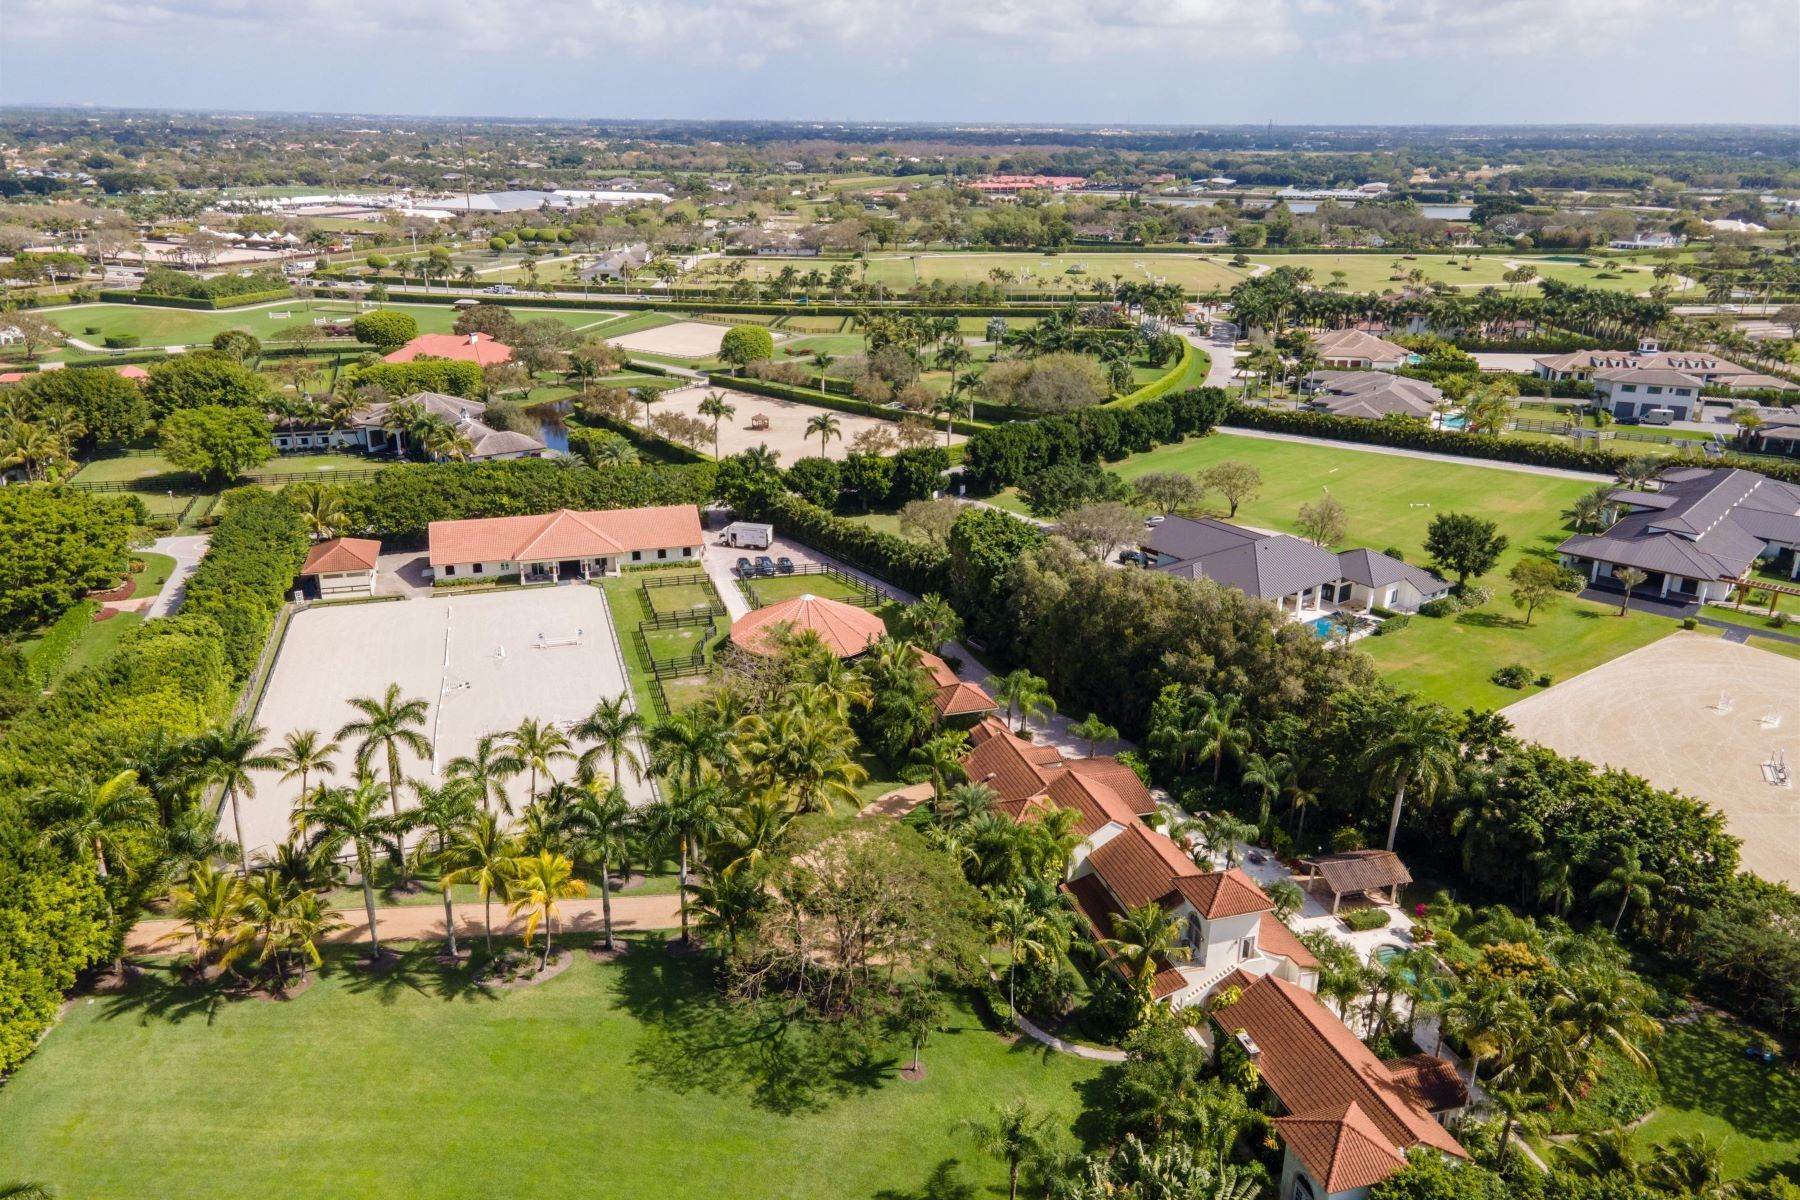 Farm and Ranch Properties for Sale at 13808 Fairlane Court, Wellington, FL 33414 13808 Fairlane Court Wellington, Florida 33414 United States